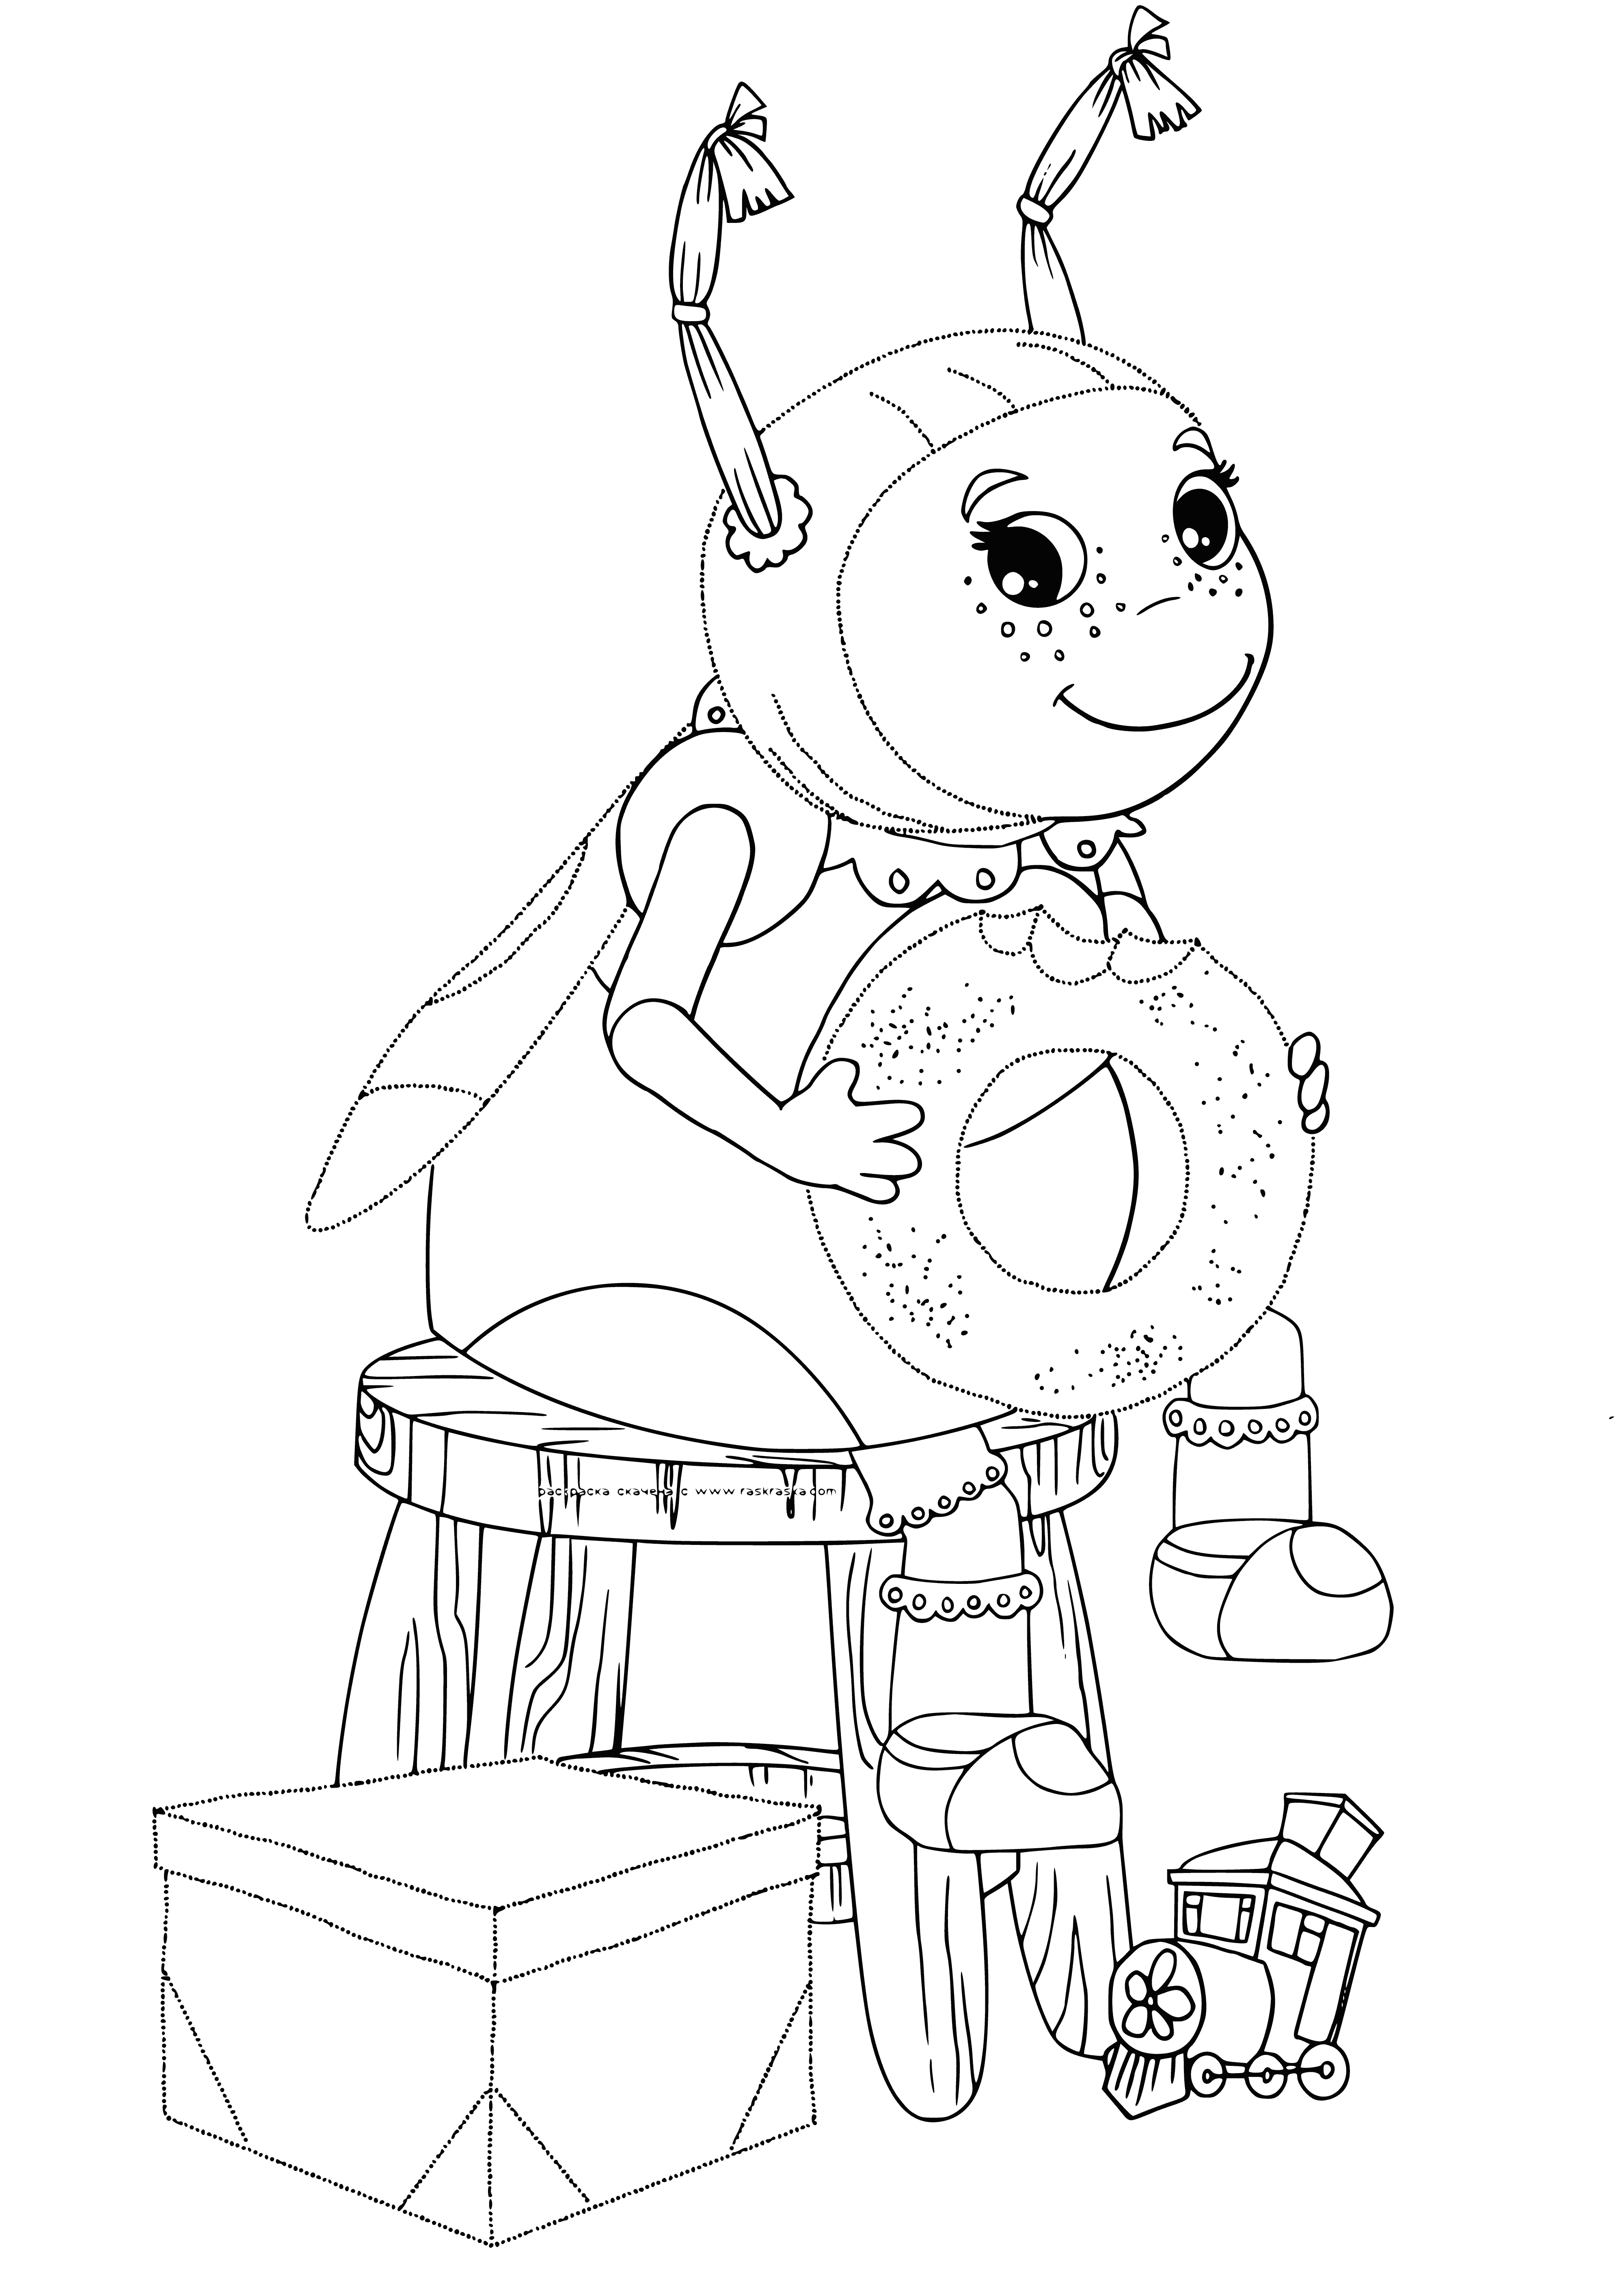 coloring page: Luntik and friends explore nature with two small legs, two wings, a tail, and four small legs.